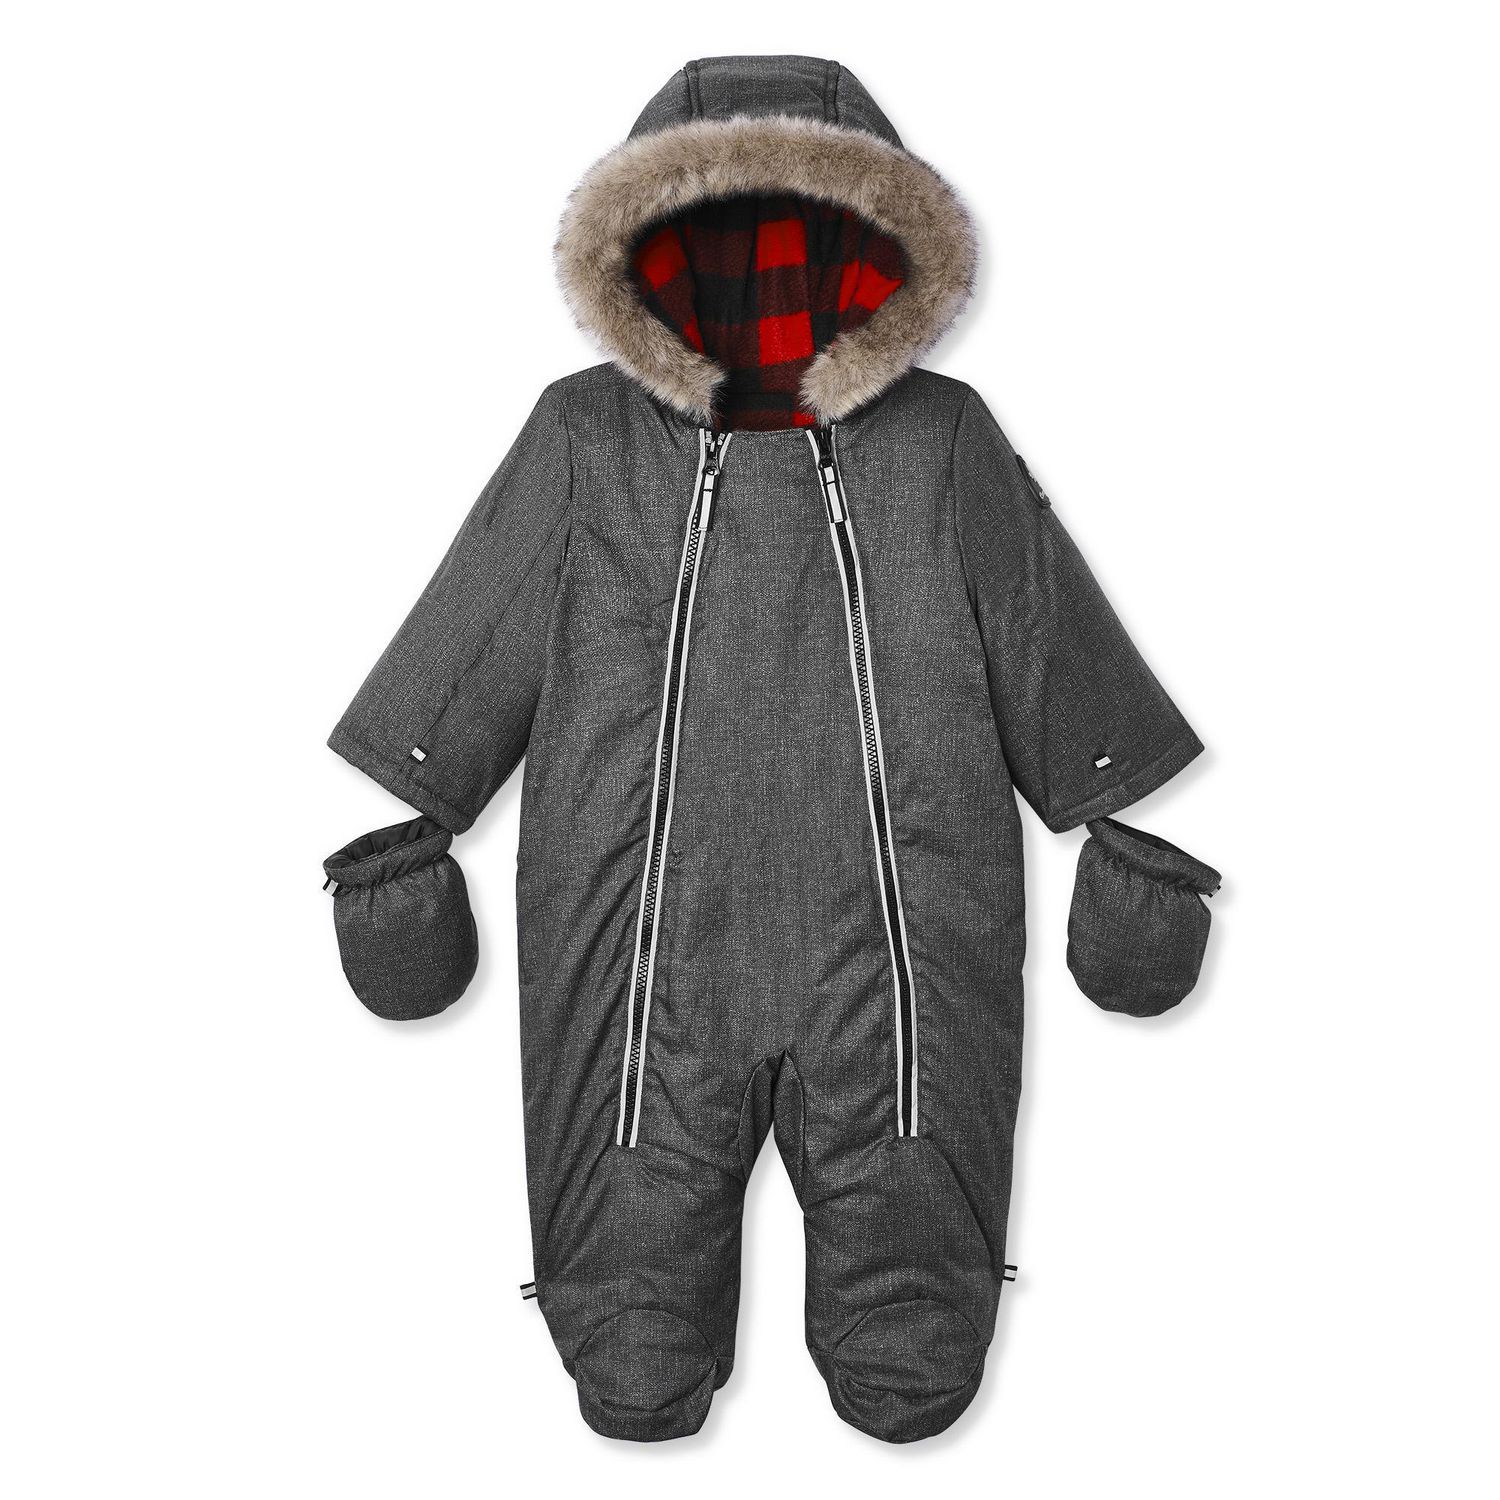 Canadiana Infants' Hooded Snowsuit 